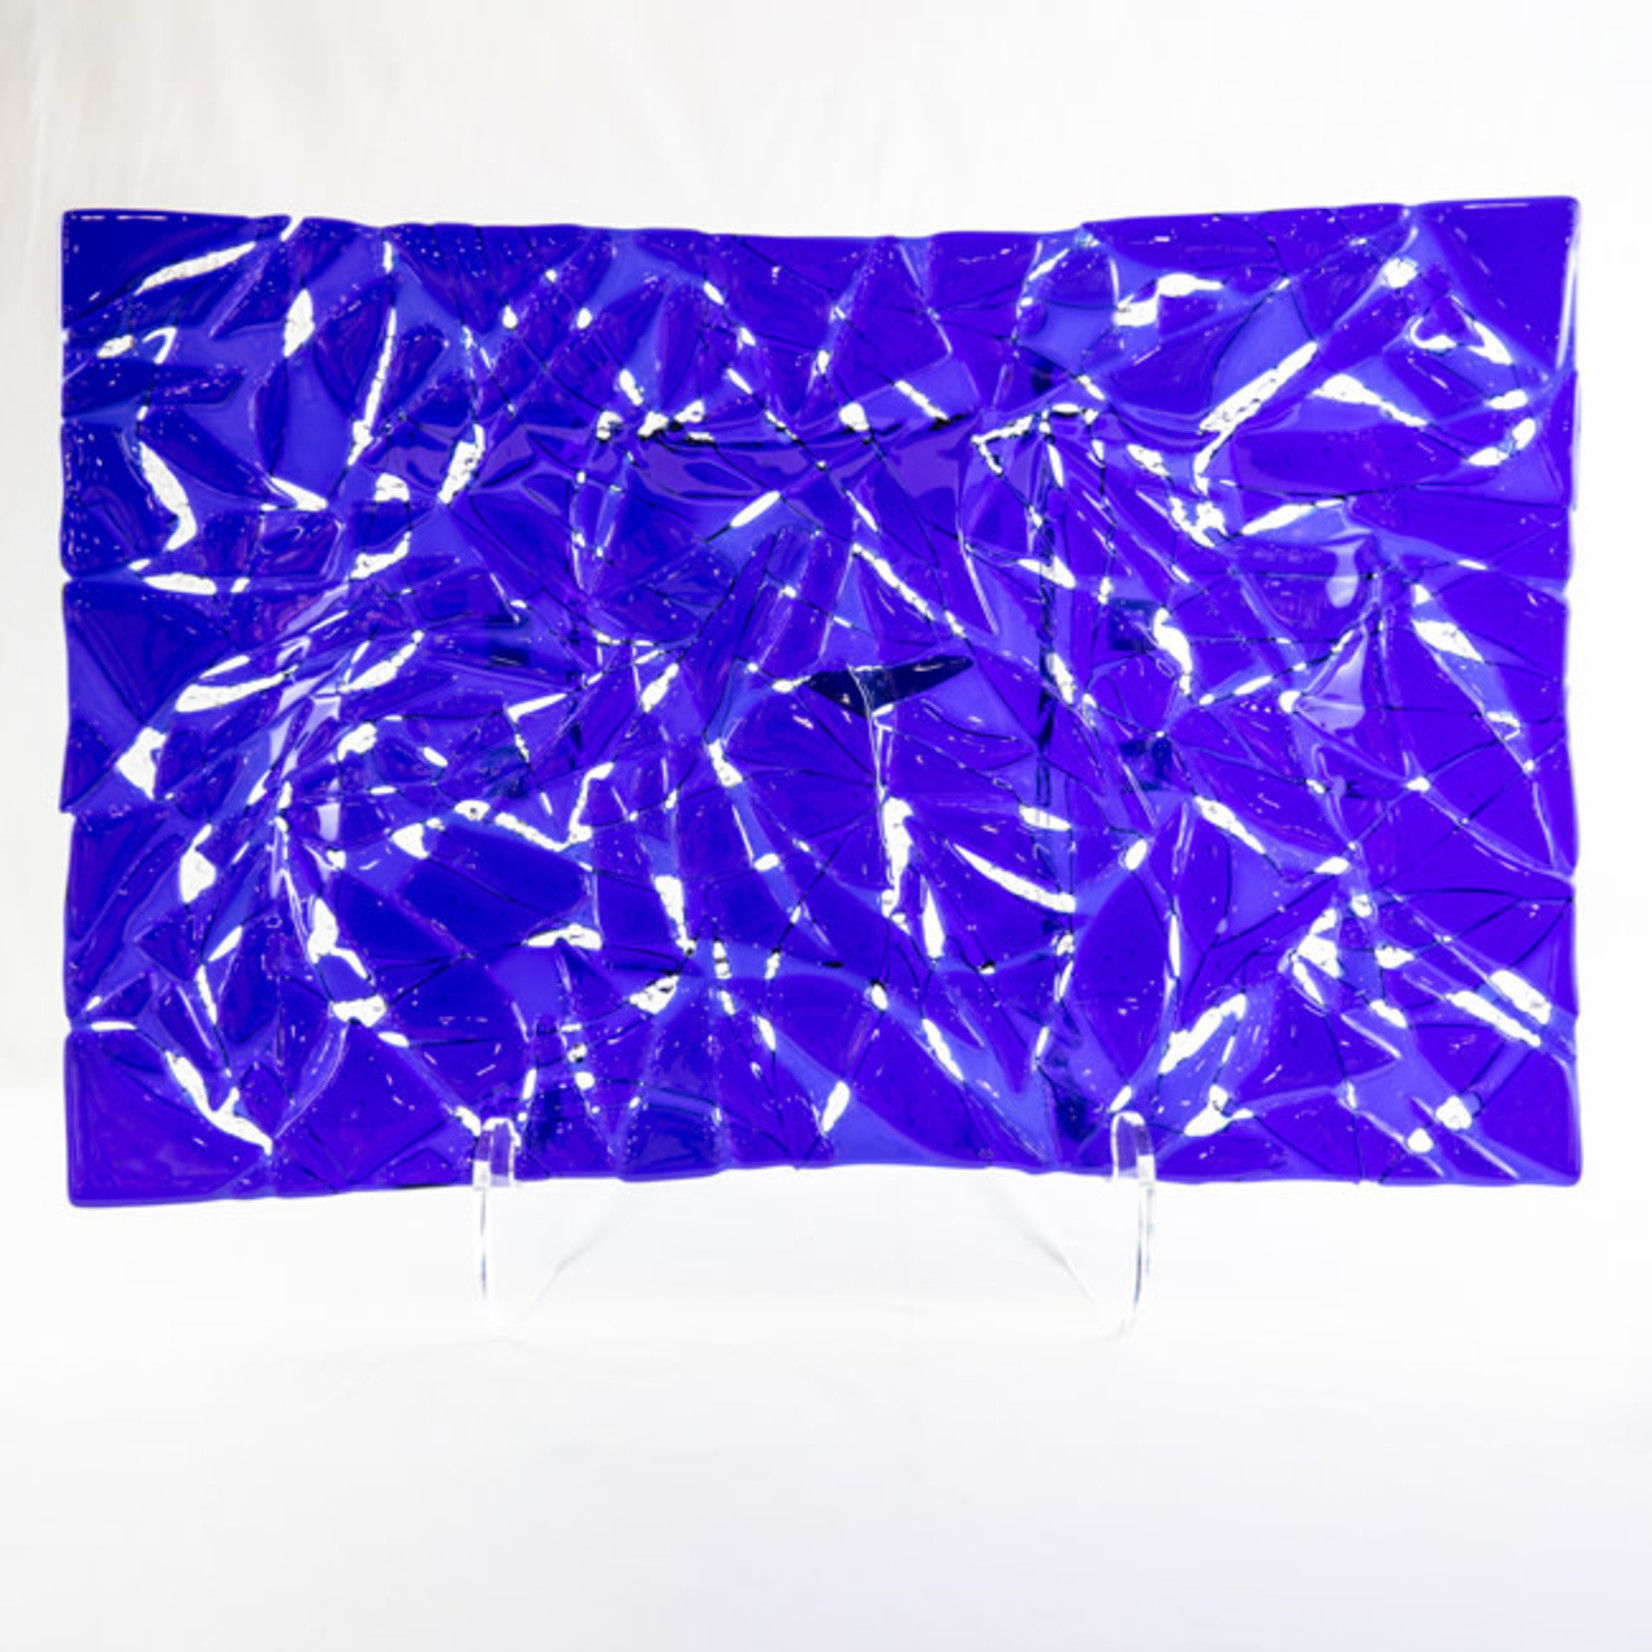 Patrice Carbaugh "BLUE ICE TRAY" 12.5x19.5x2 Fused Glass